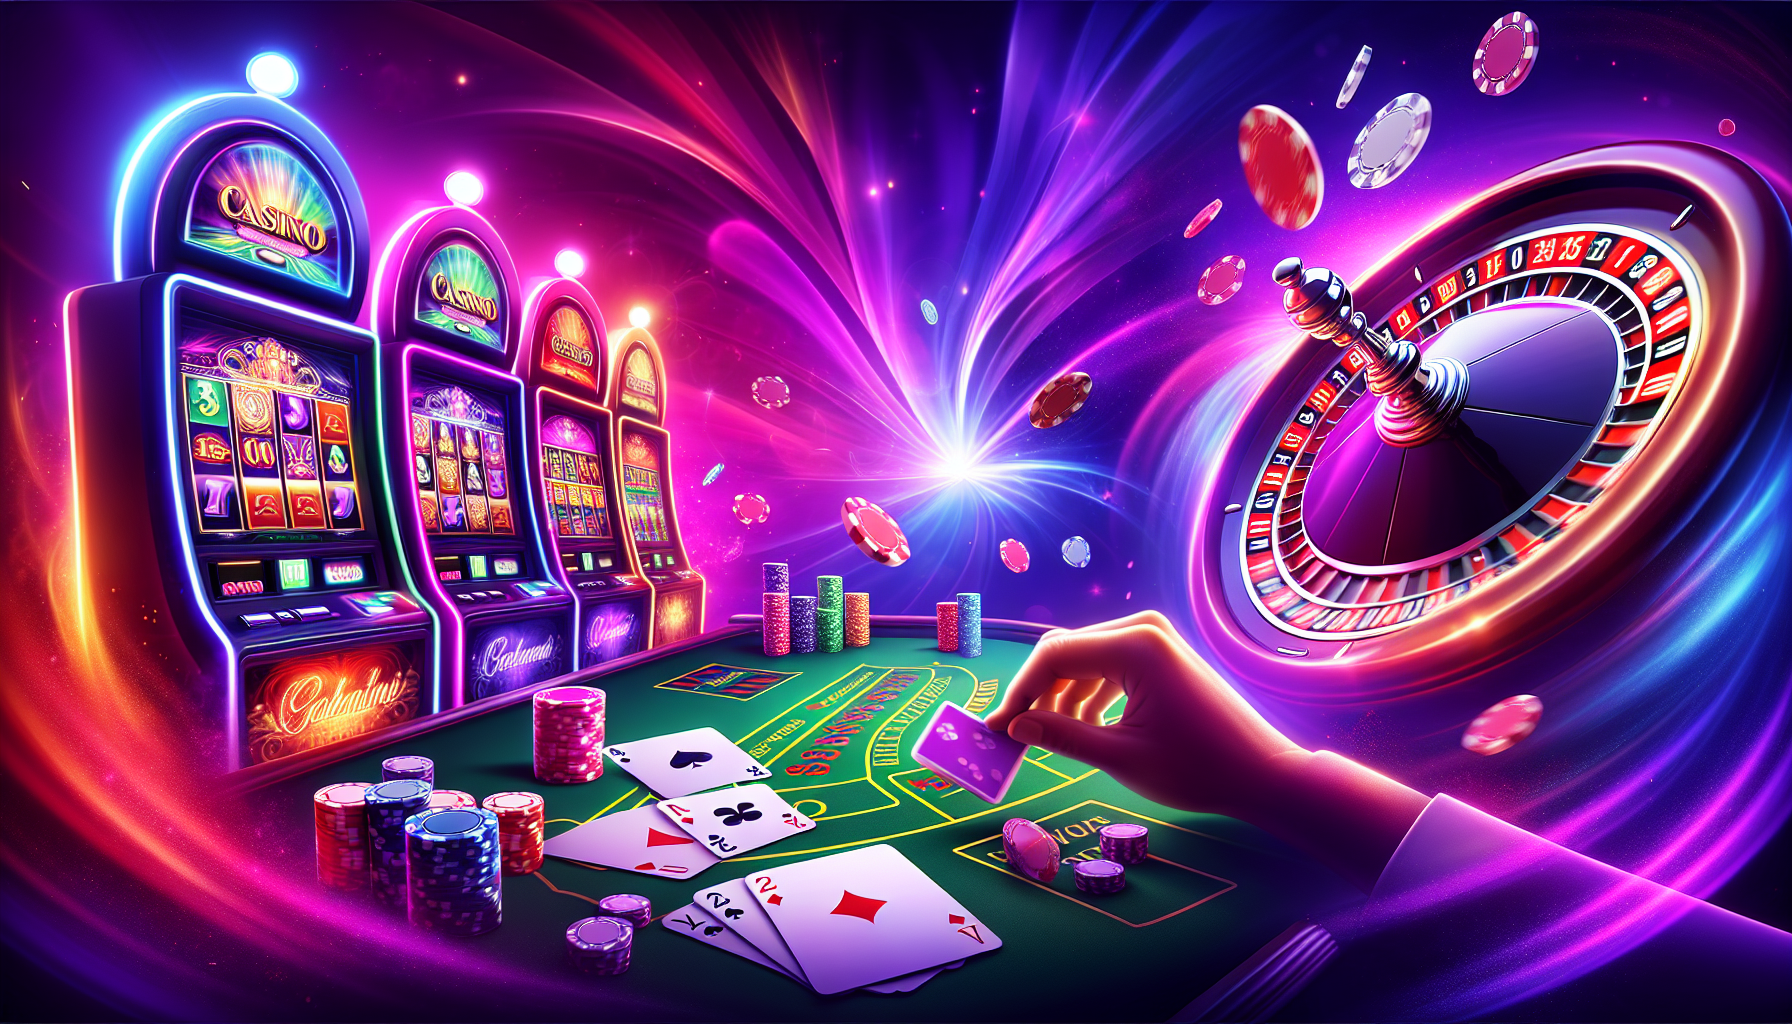 Various casino games including slots, blackjack, and roulette